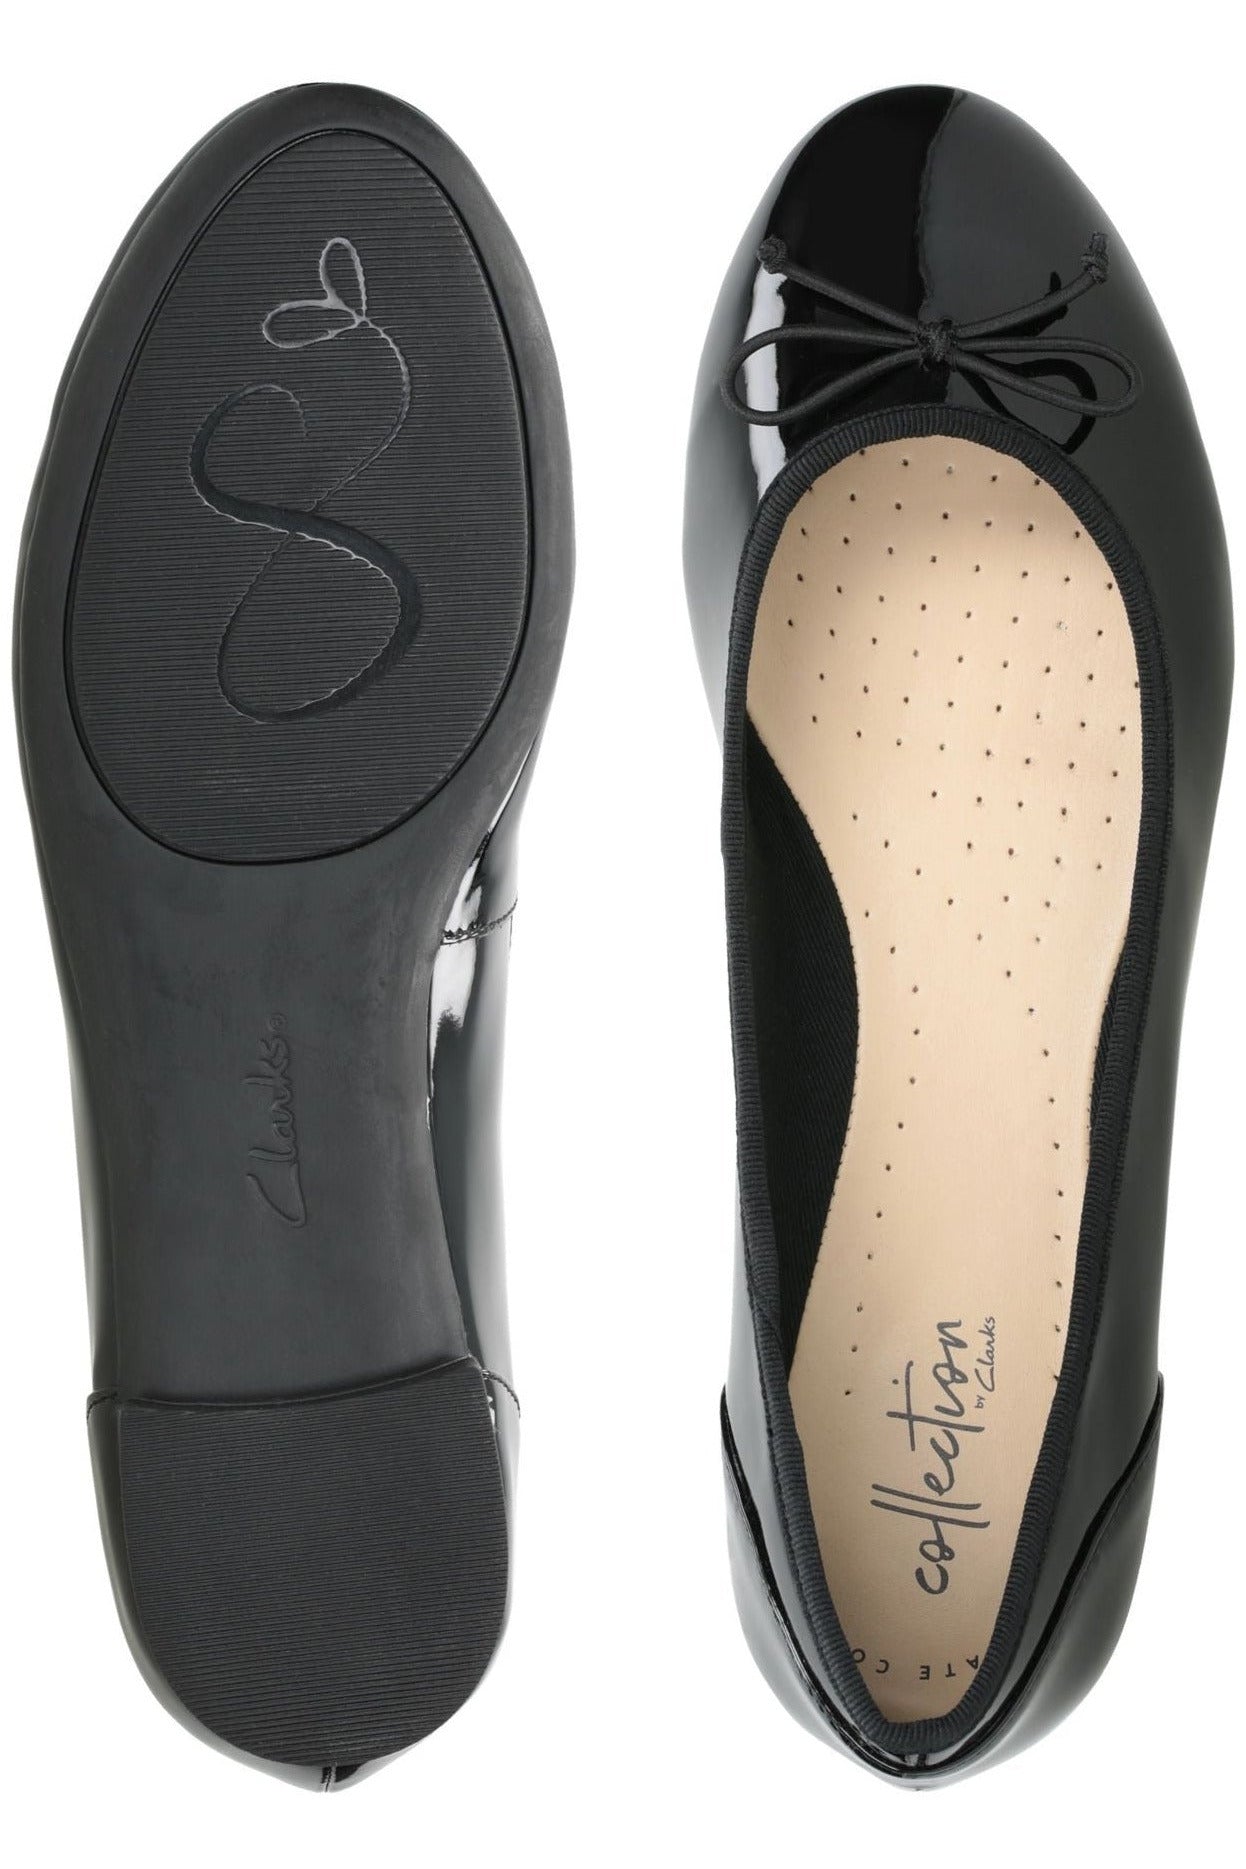 Clarks Womens Couture Bloom Black Patent